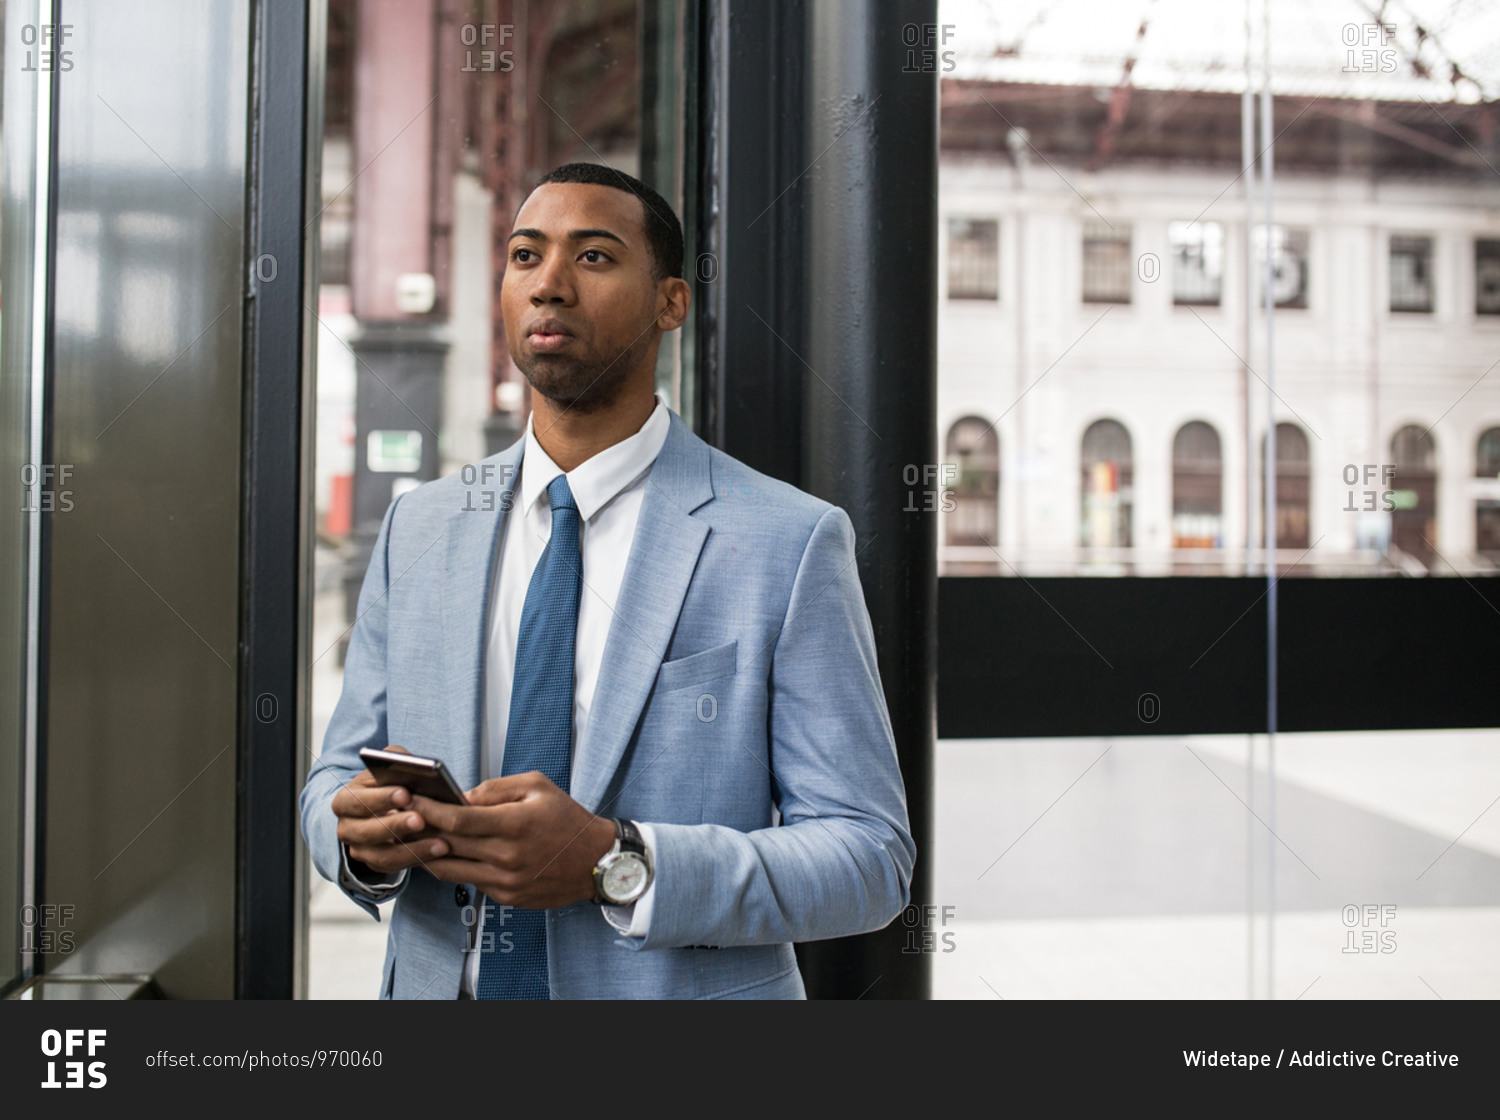 Serious black man in trendy suit holding smartphone and looking away thoughtfully through glass.